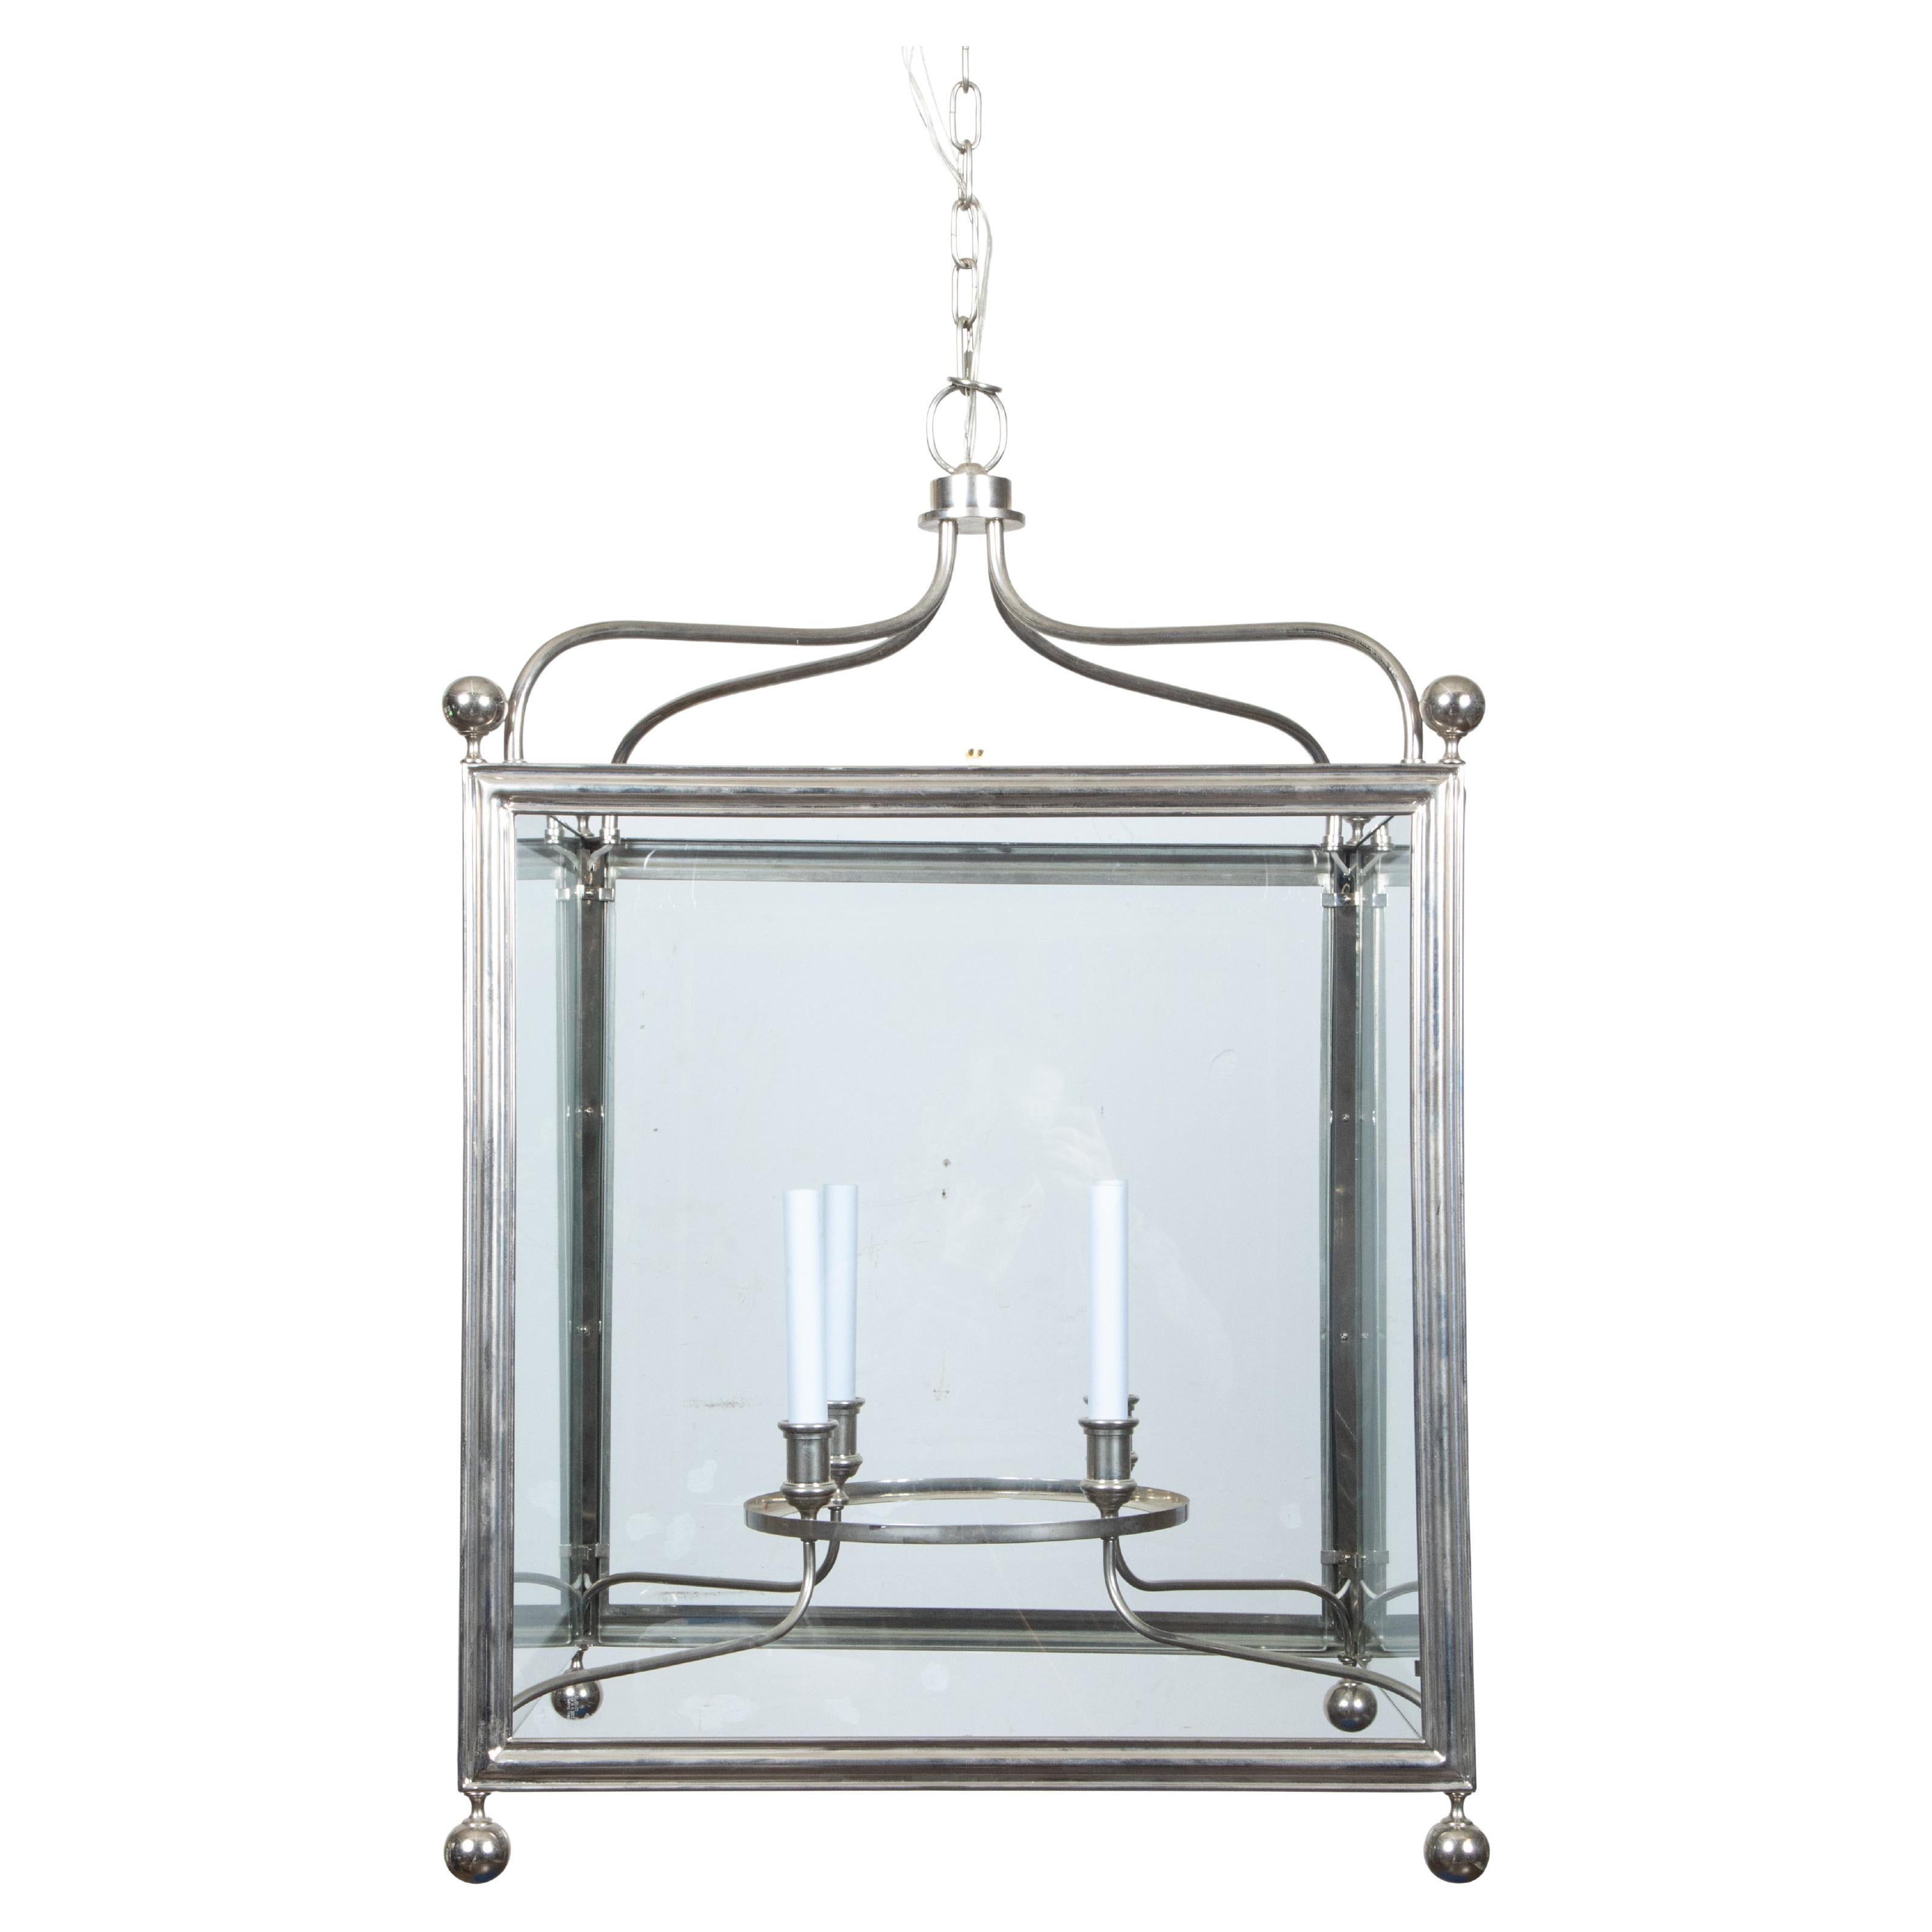 English Midcentury Four-Light Lantern with Silver Color and Petite Spheres